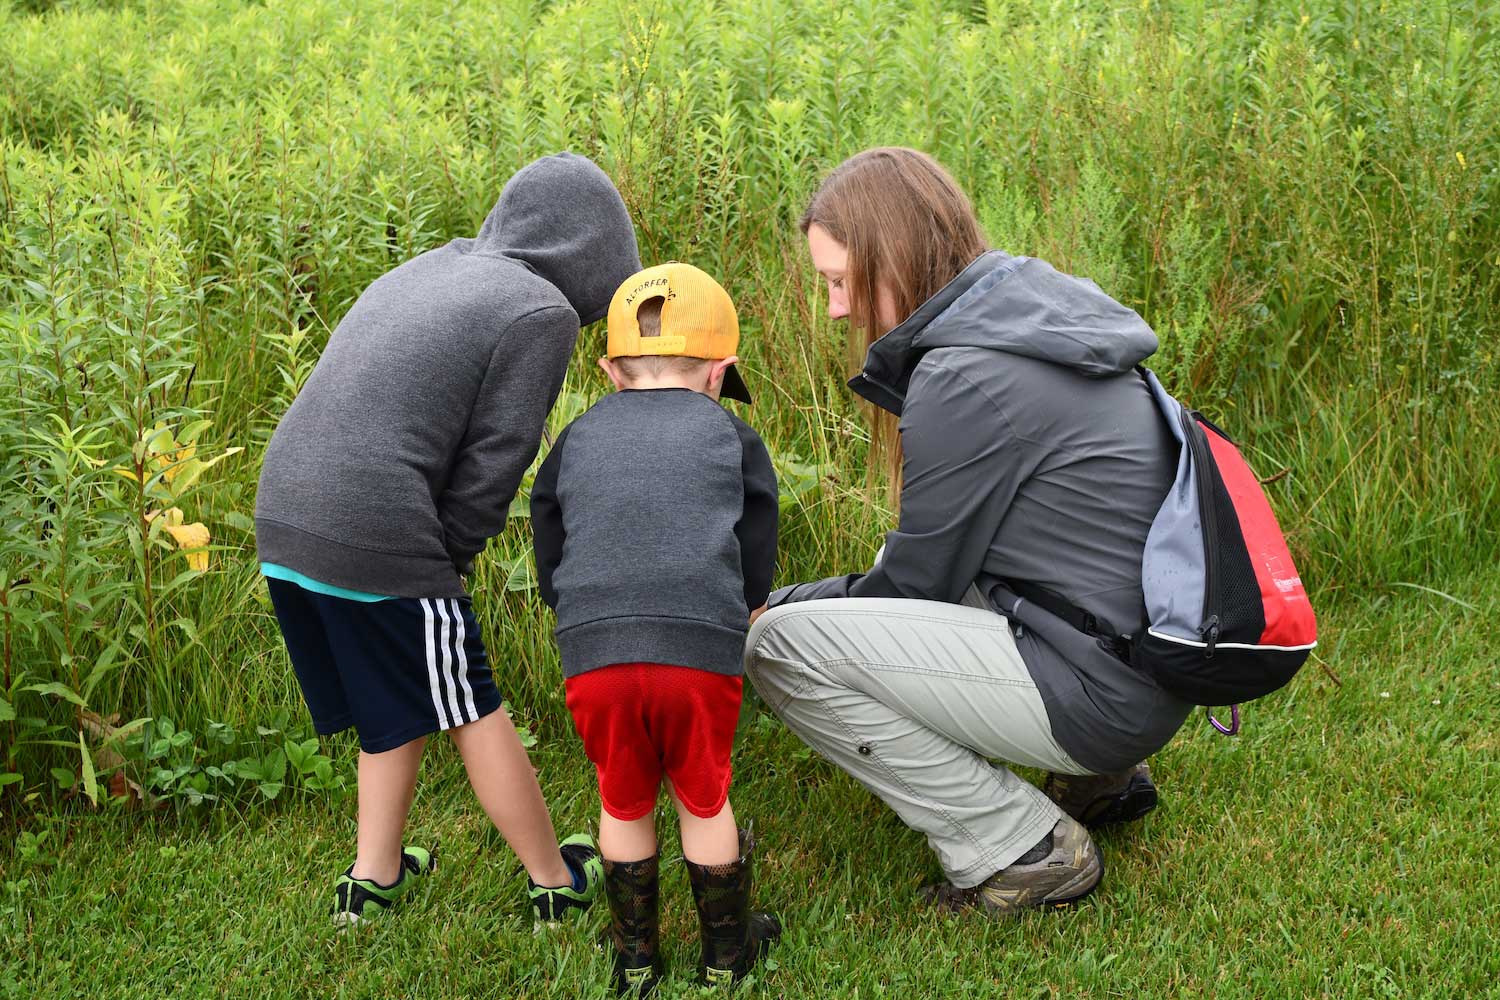 An adult and two young children crouched down in the grass looking at something with prairie plants in the background.